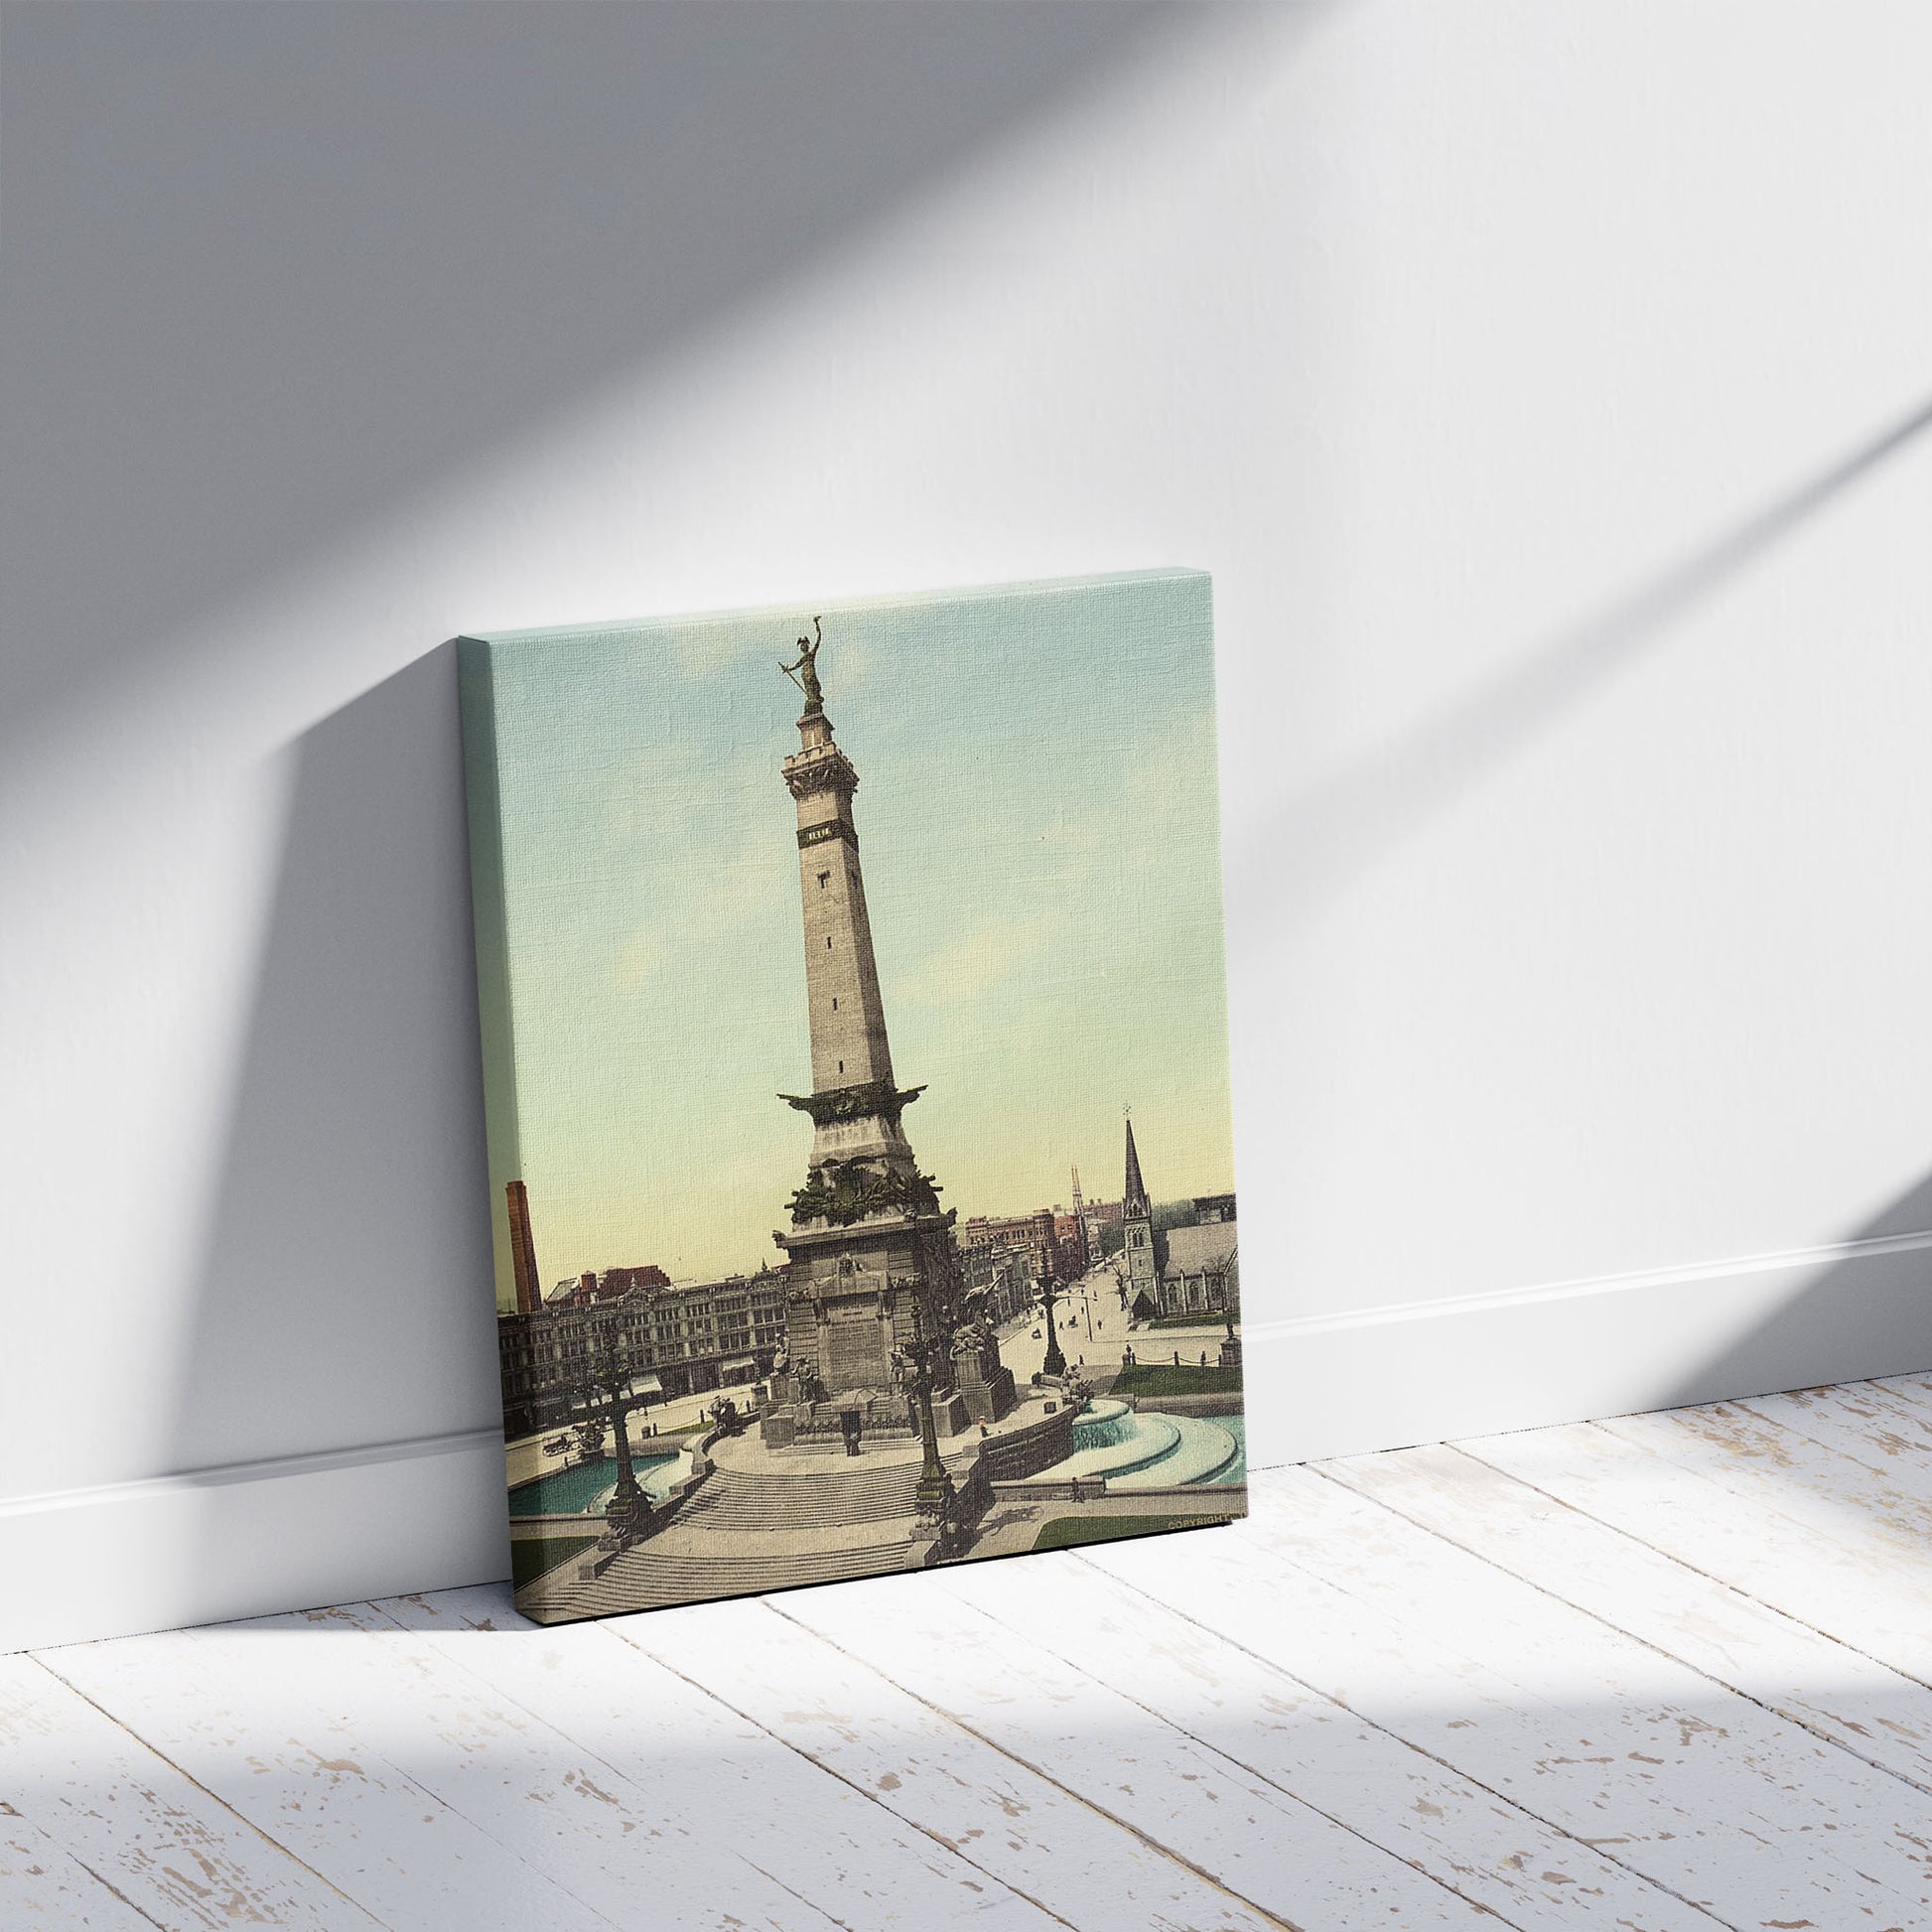 A picture of Army and Navy monument, Indianapolis, Ind., a mockup of the print leaning against a wall